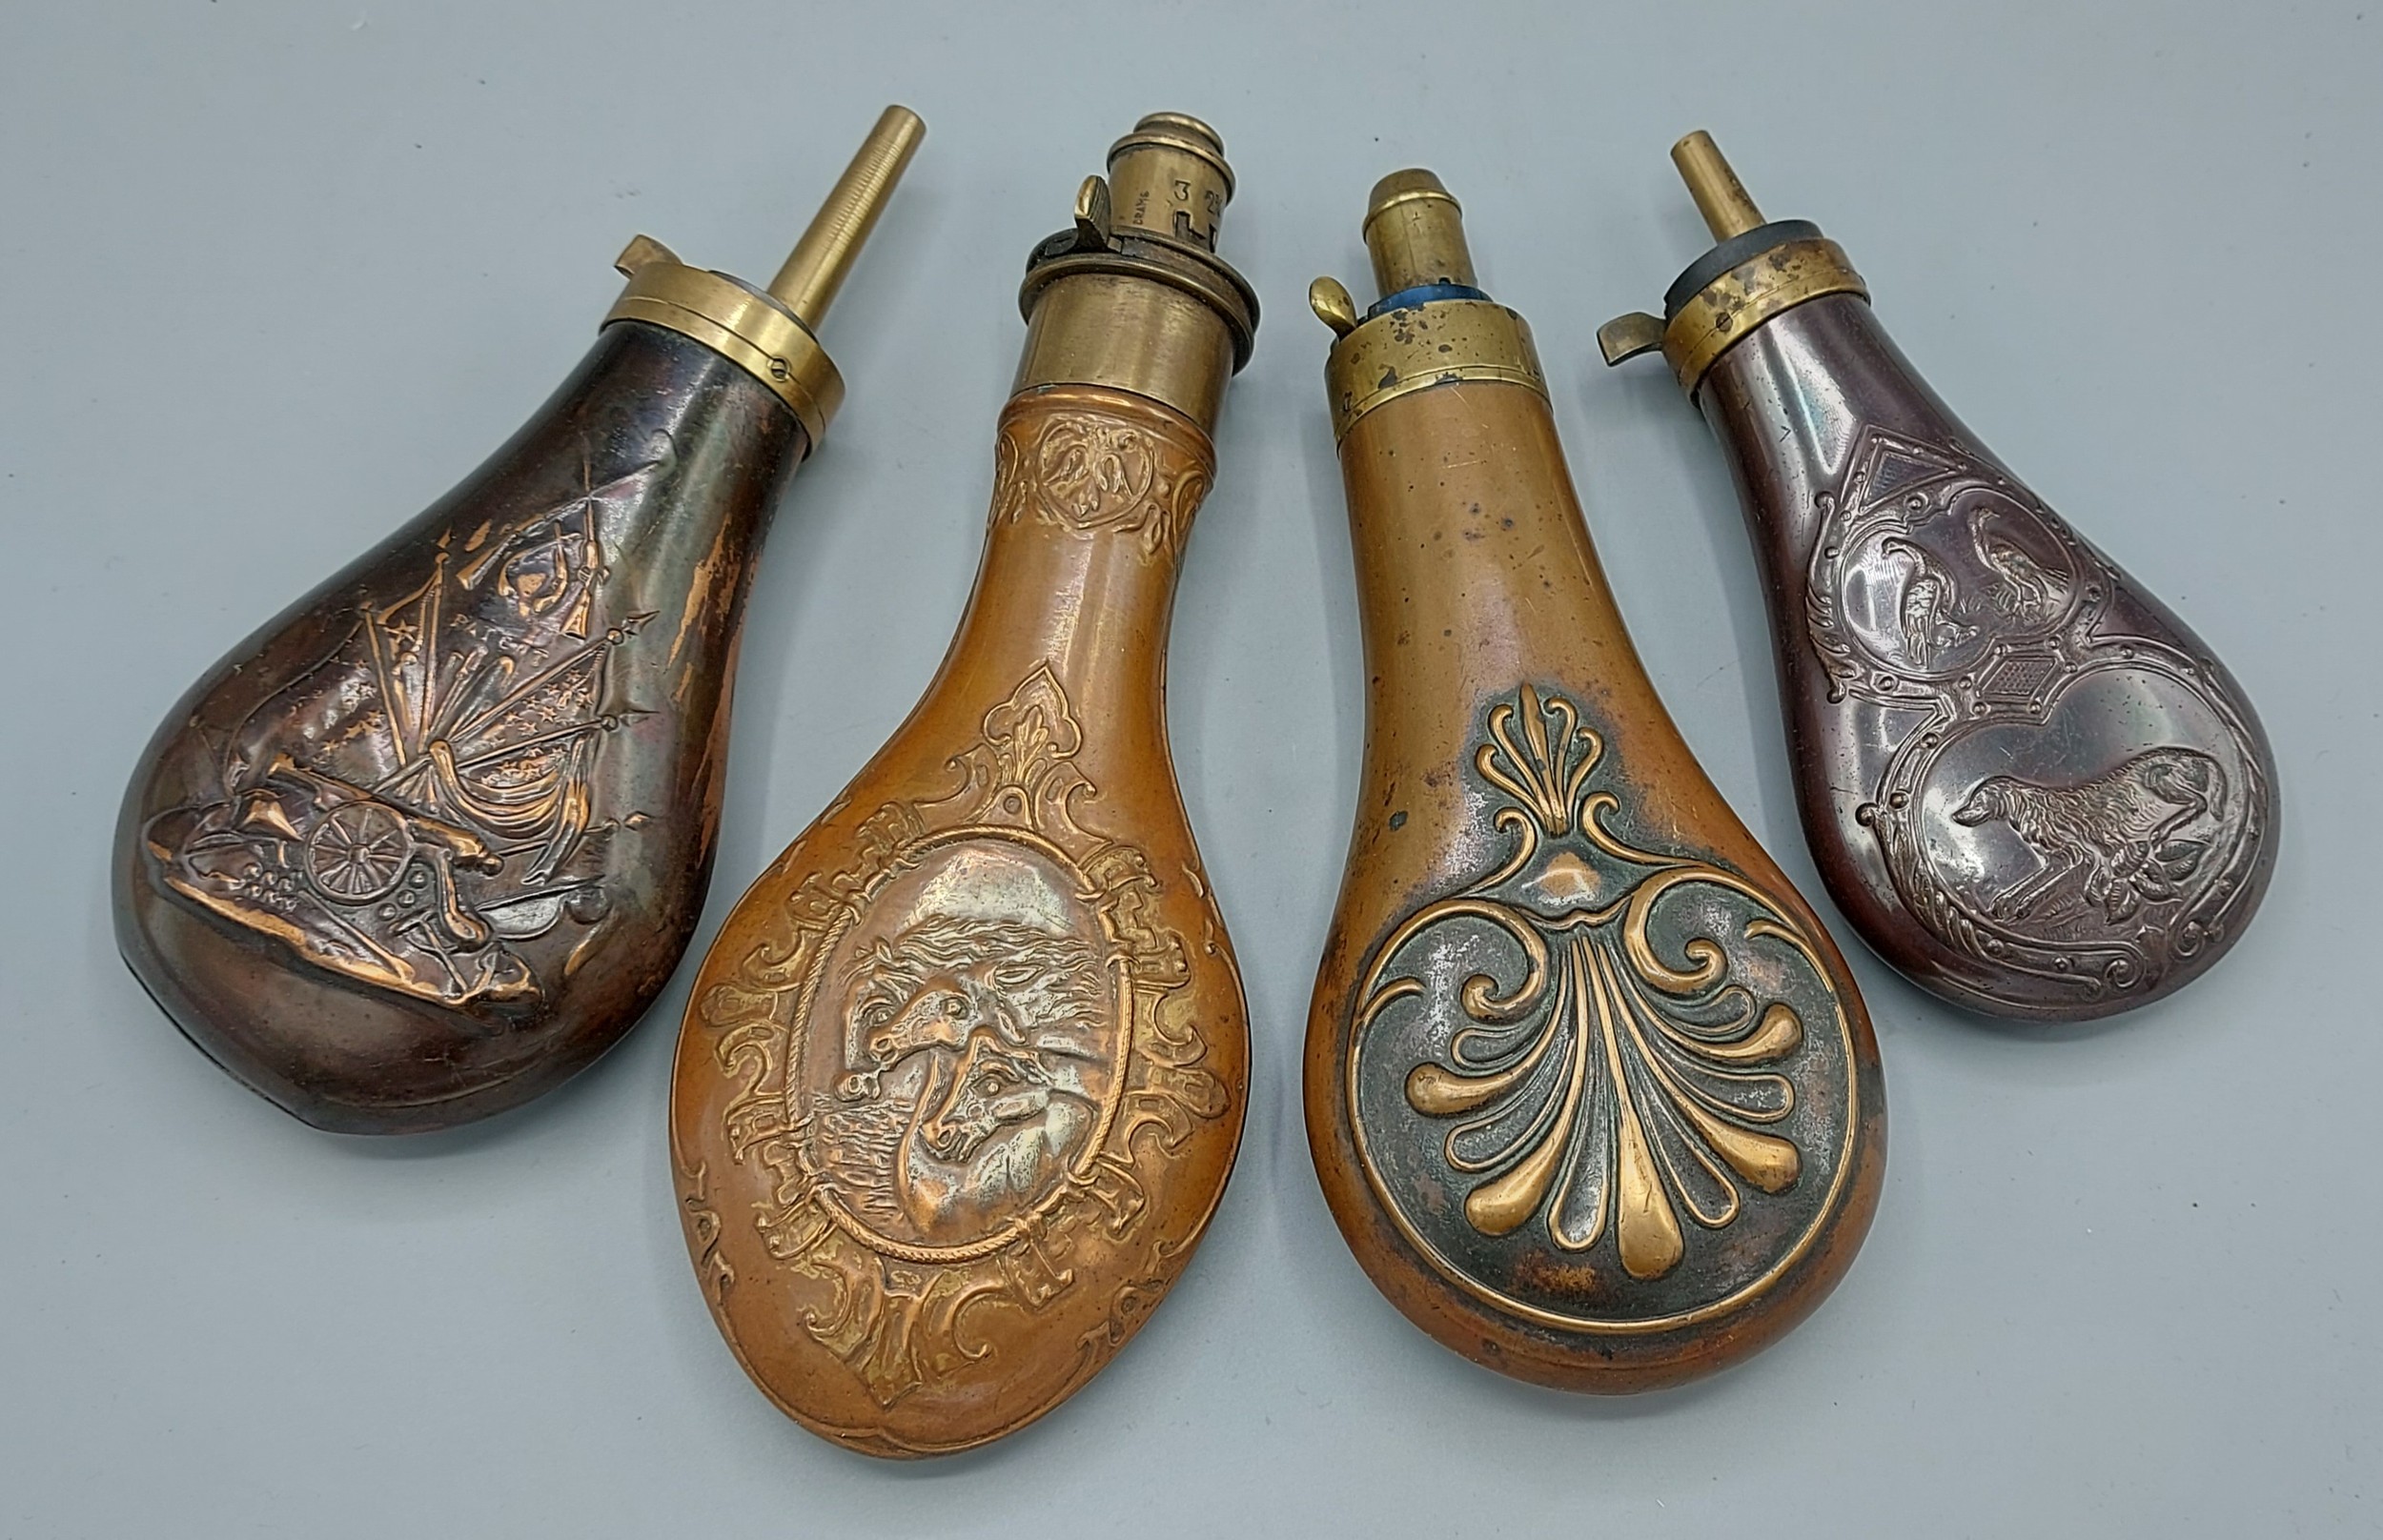 A group of four early metal powder flasks, one decorated with an Artillery cannon